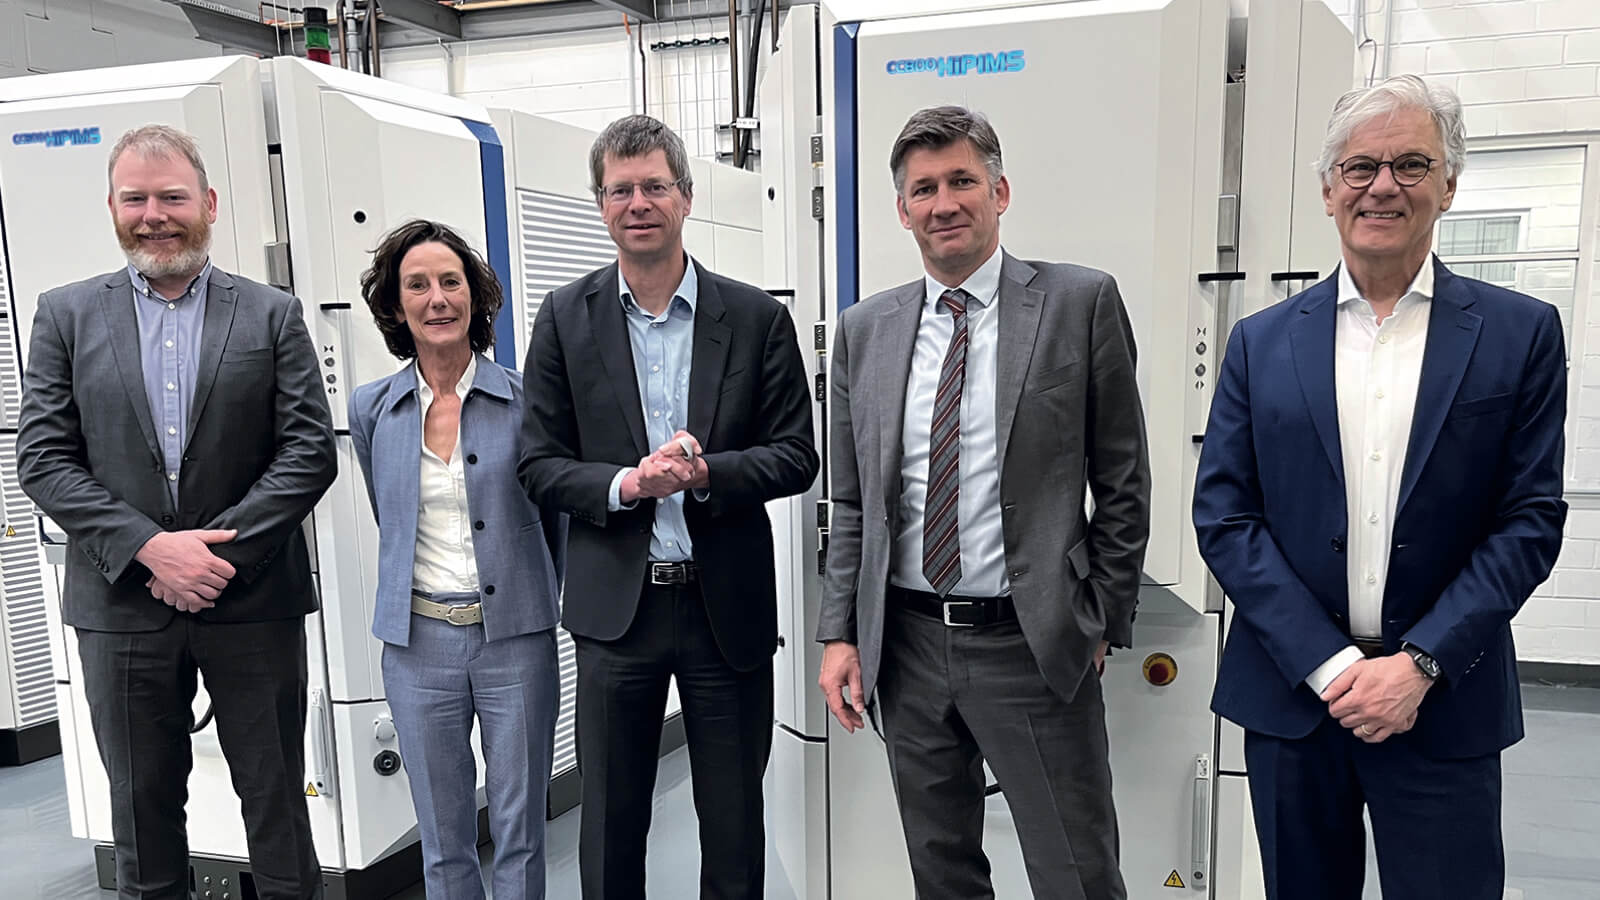 ANCA and CemeCon deepen their cooperation (from left): Edmund Boland, General Manager, AMT, ANCA, Dr.-Ing. Beate Hüttermann, CMO, CemeCon AG, Dr.-Ing. Christoph Schiffers, Product Manager Coating Technology, CemeCon AG, Martin Ripple, CEO, ANCA Group, and Dr.-Ing. Jan Langfelder, Global Key Account Manager, ANCA